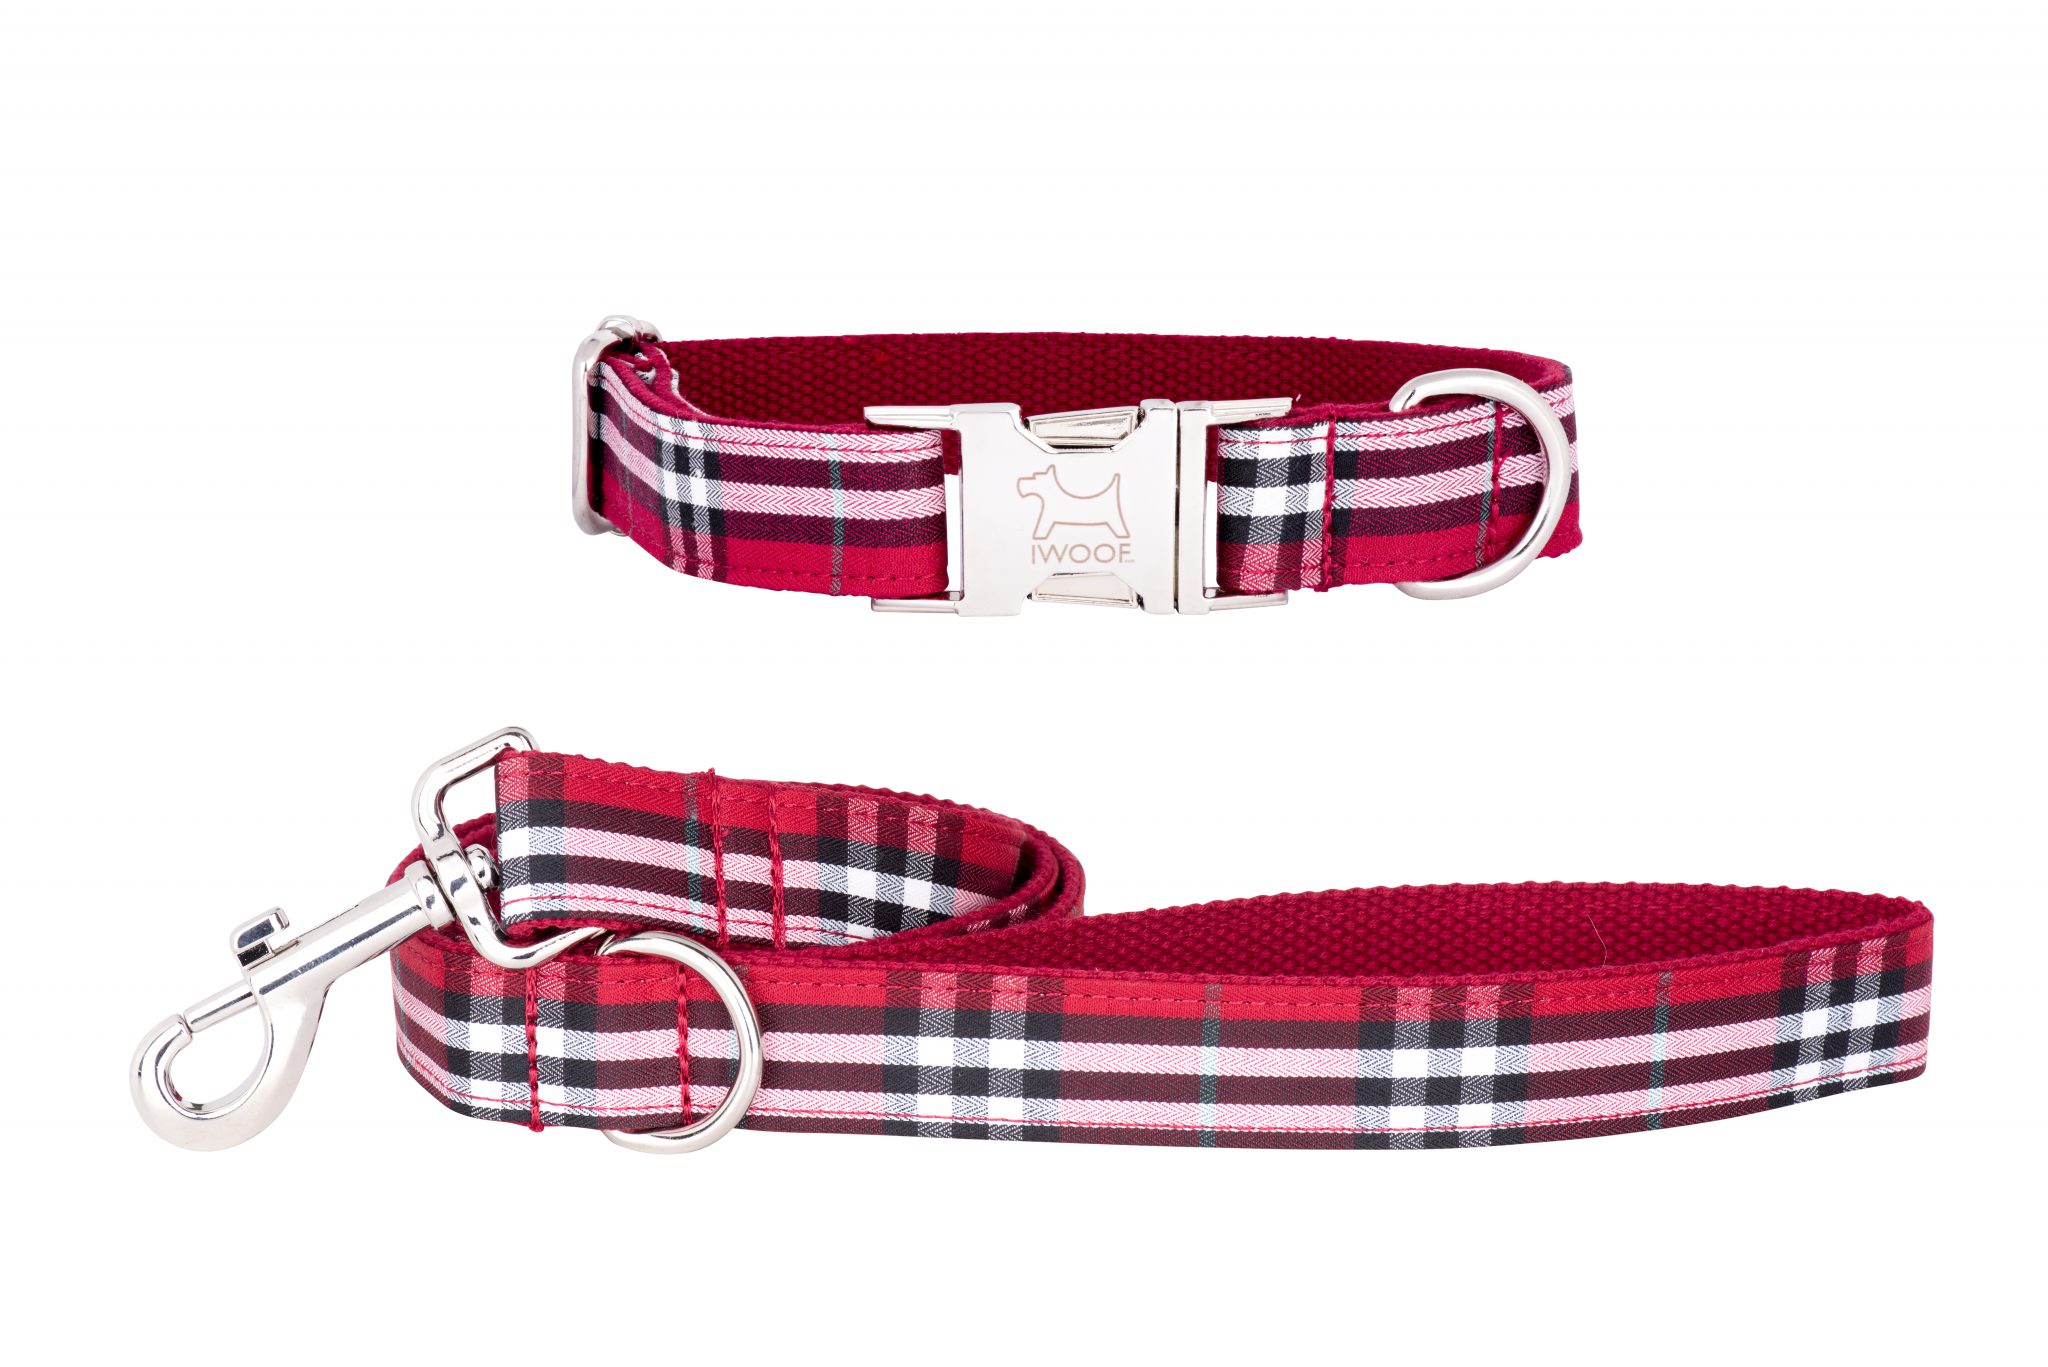 Tomato designer dog collar and matching dog lead by IWOOF